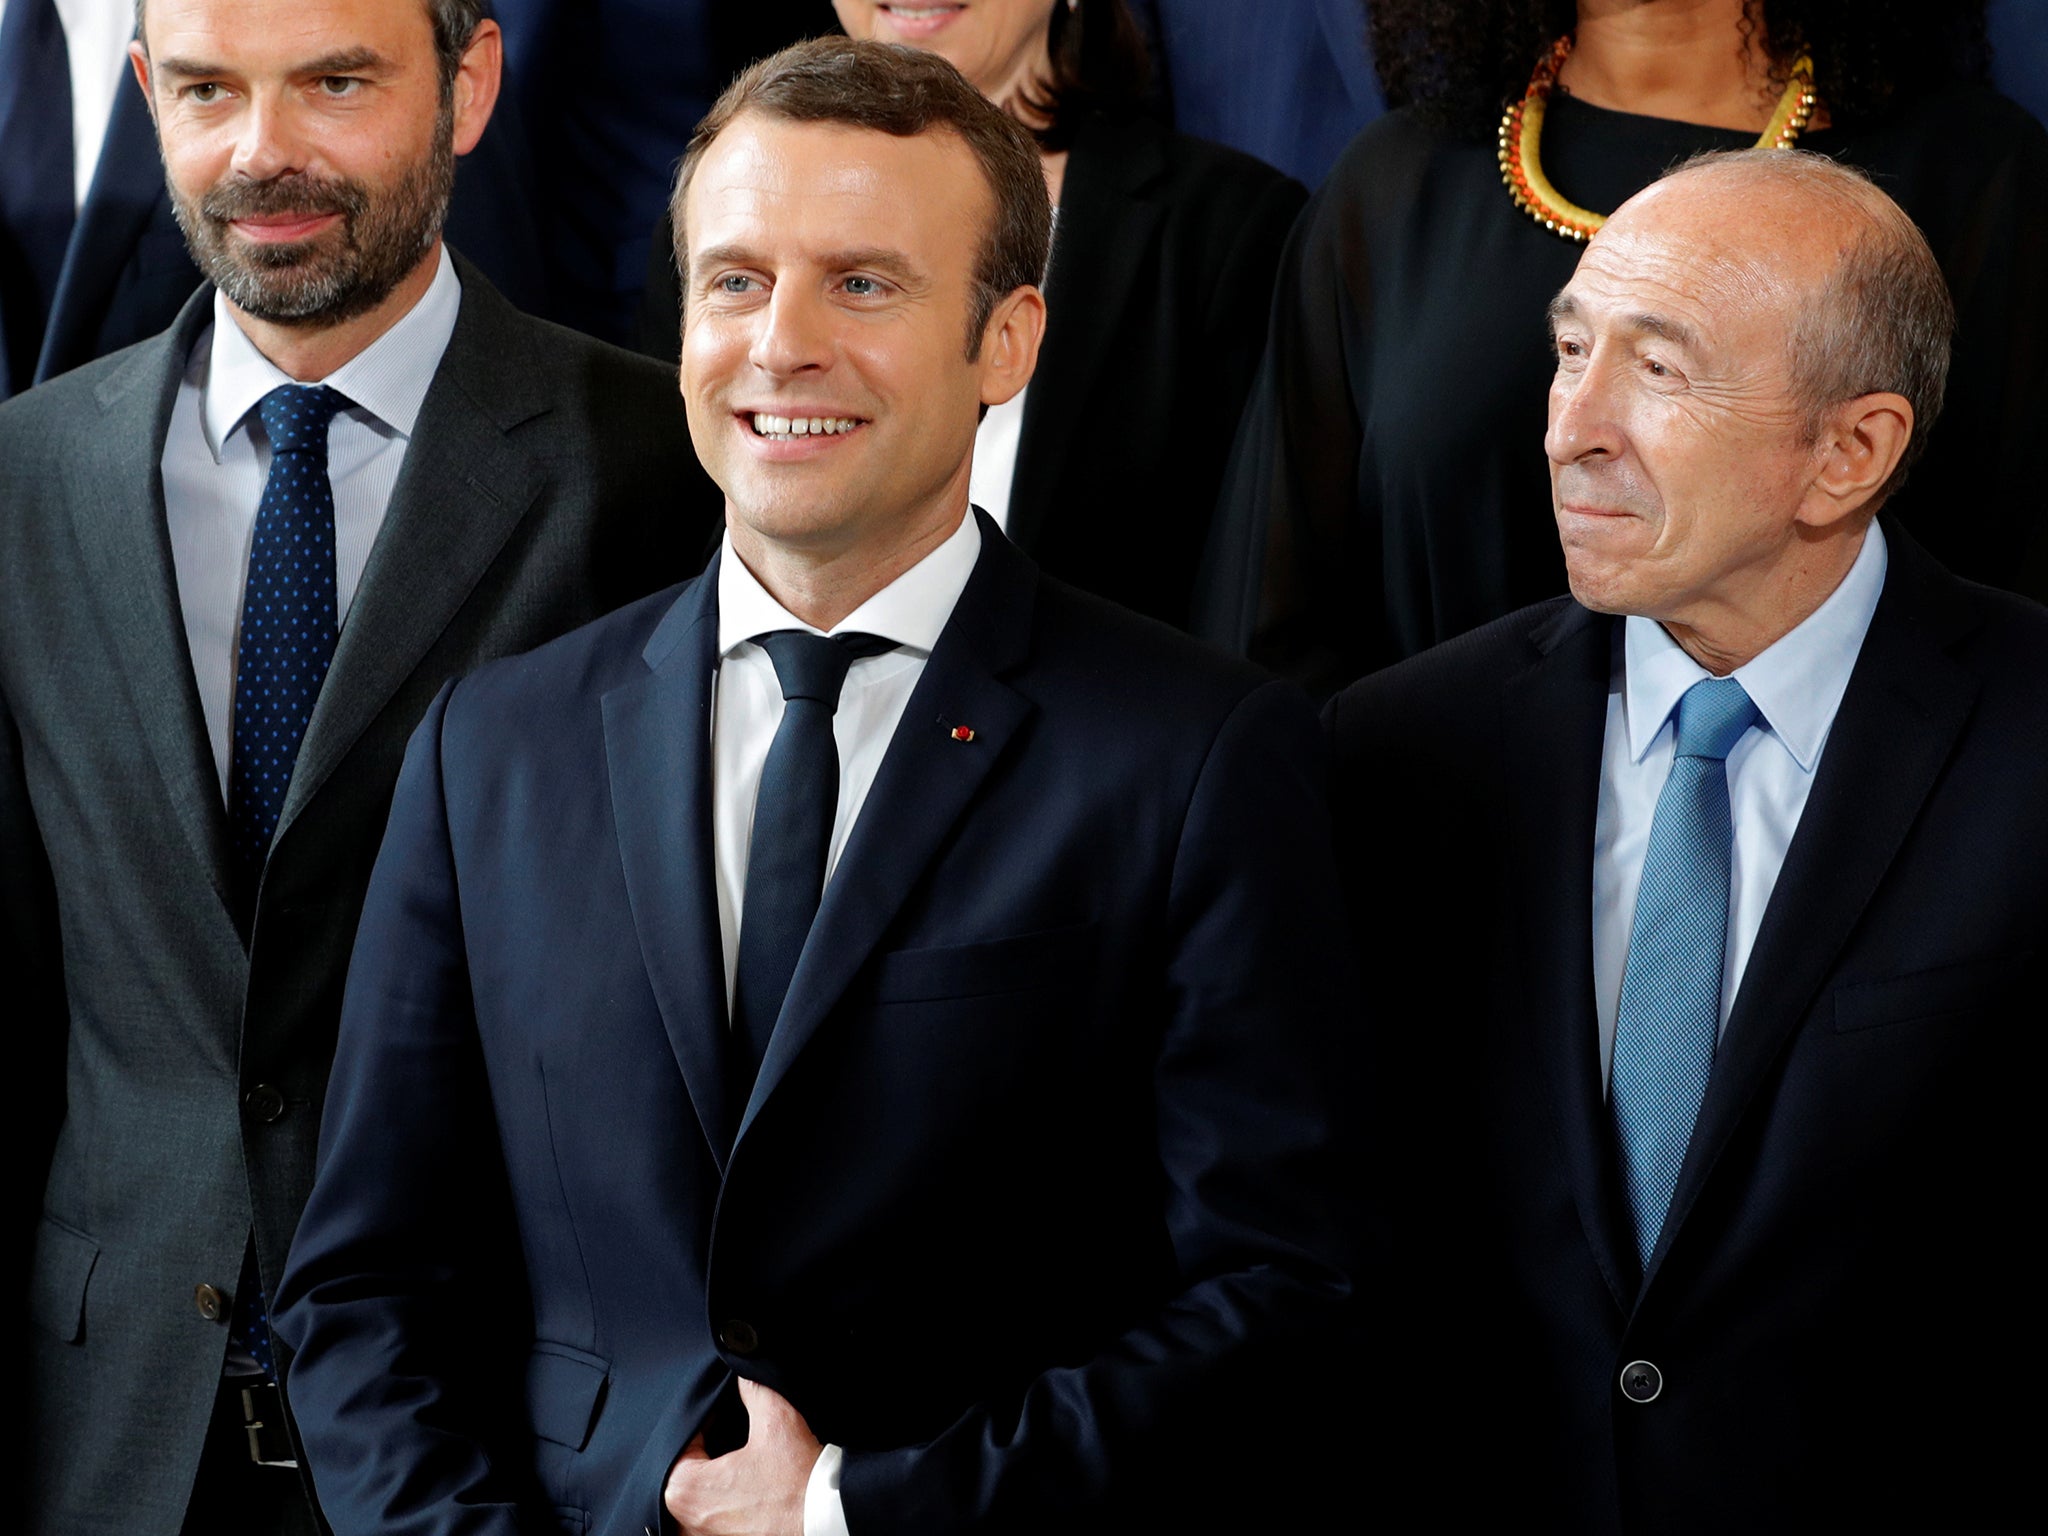 French President Emmanuel Macron (centre), Prime Minister Edouard Philippe (left) and Interior Minister Gerard Collomb at the Elysee Palace in Paris